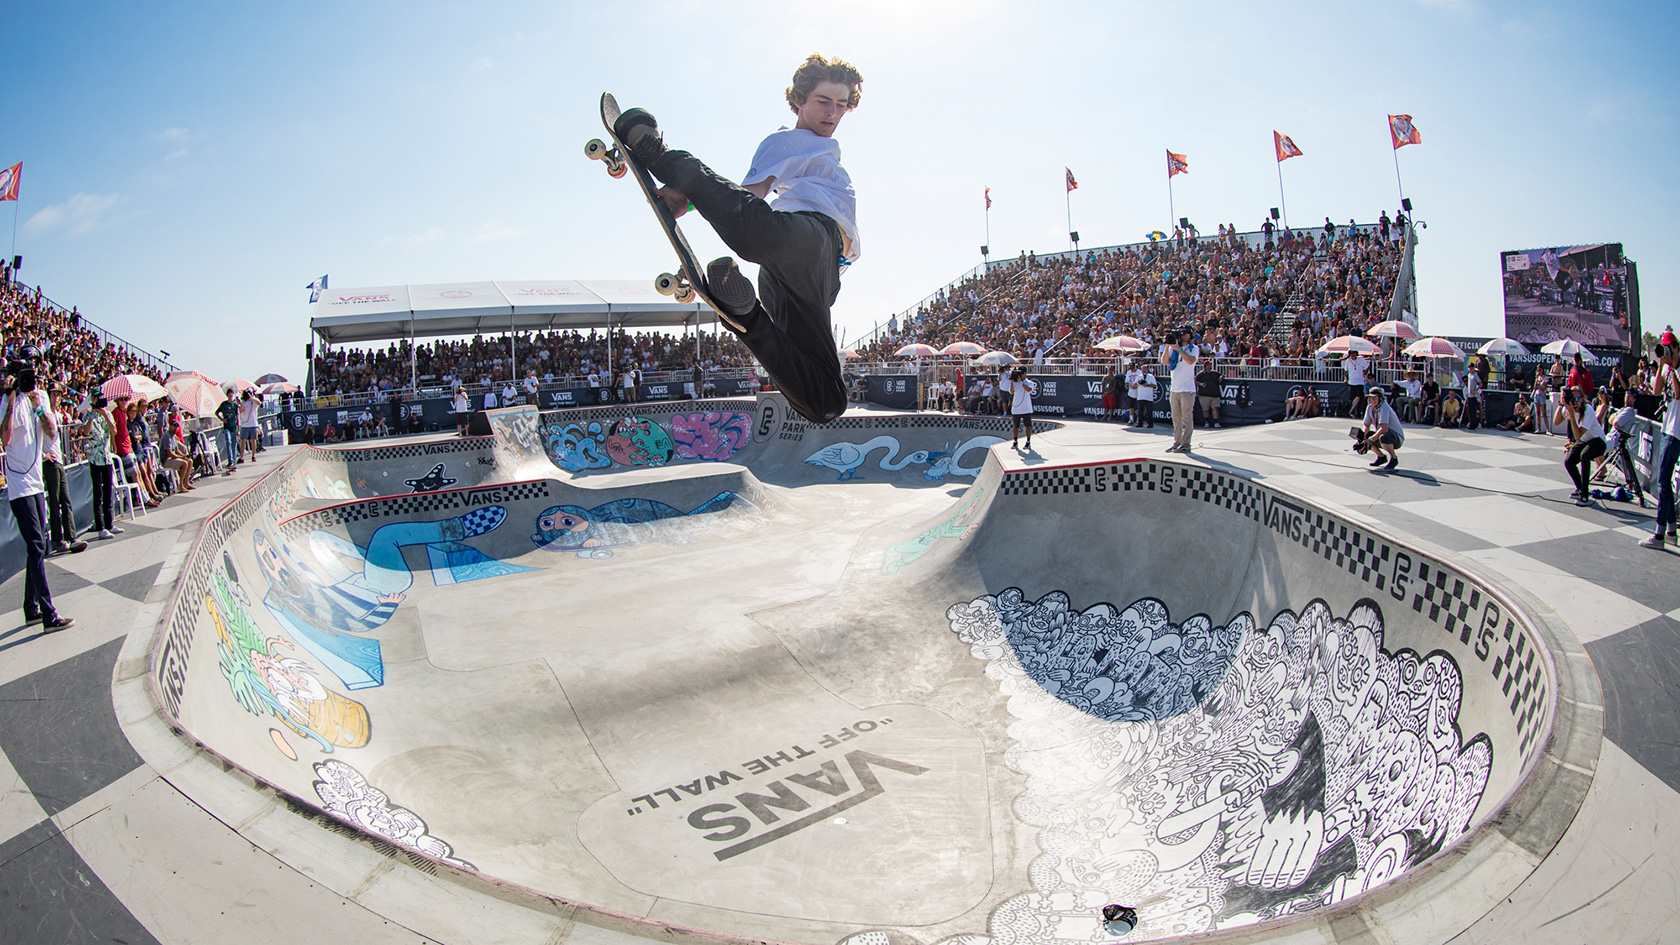 Vans US Open of Surfing @ Huntington Beach | lifewithoutandy